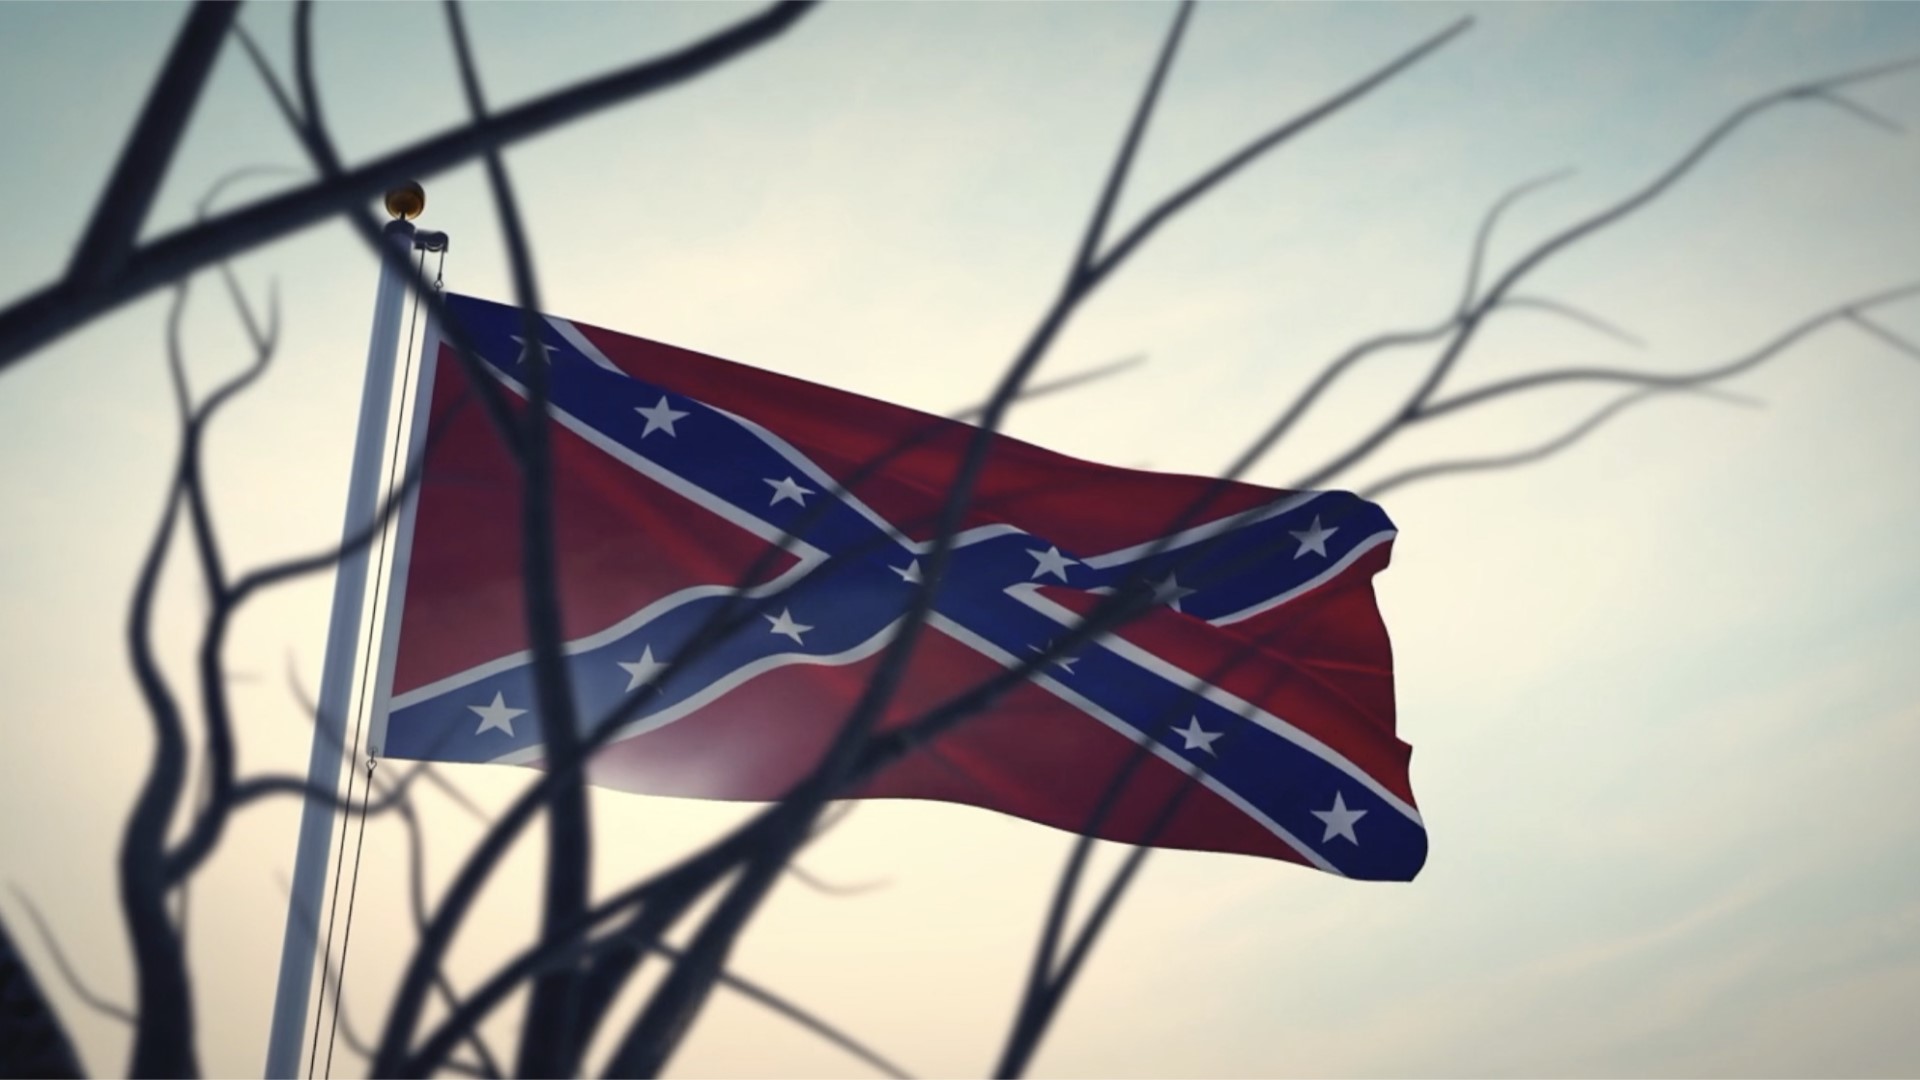 More than half of Southerners now primarily tie the Confederate flag to racism.